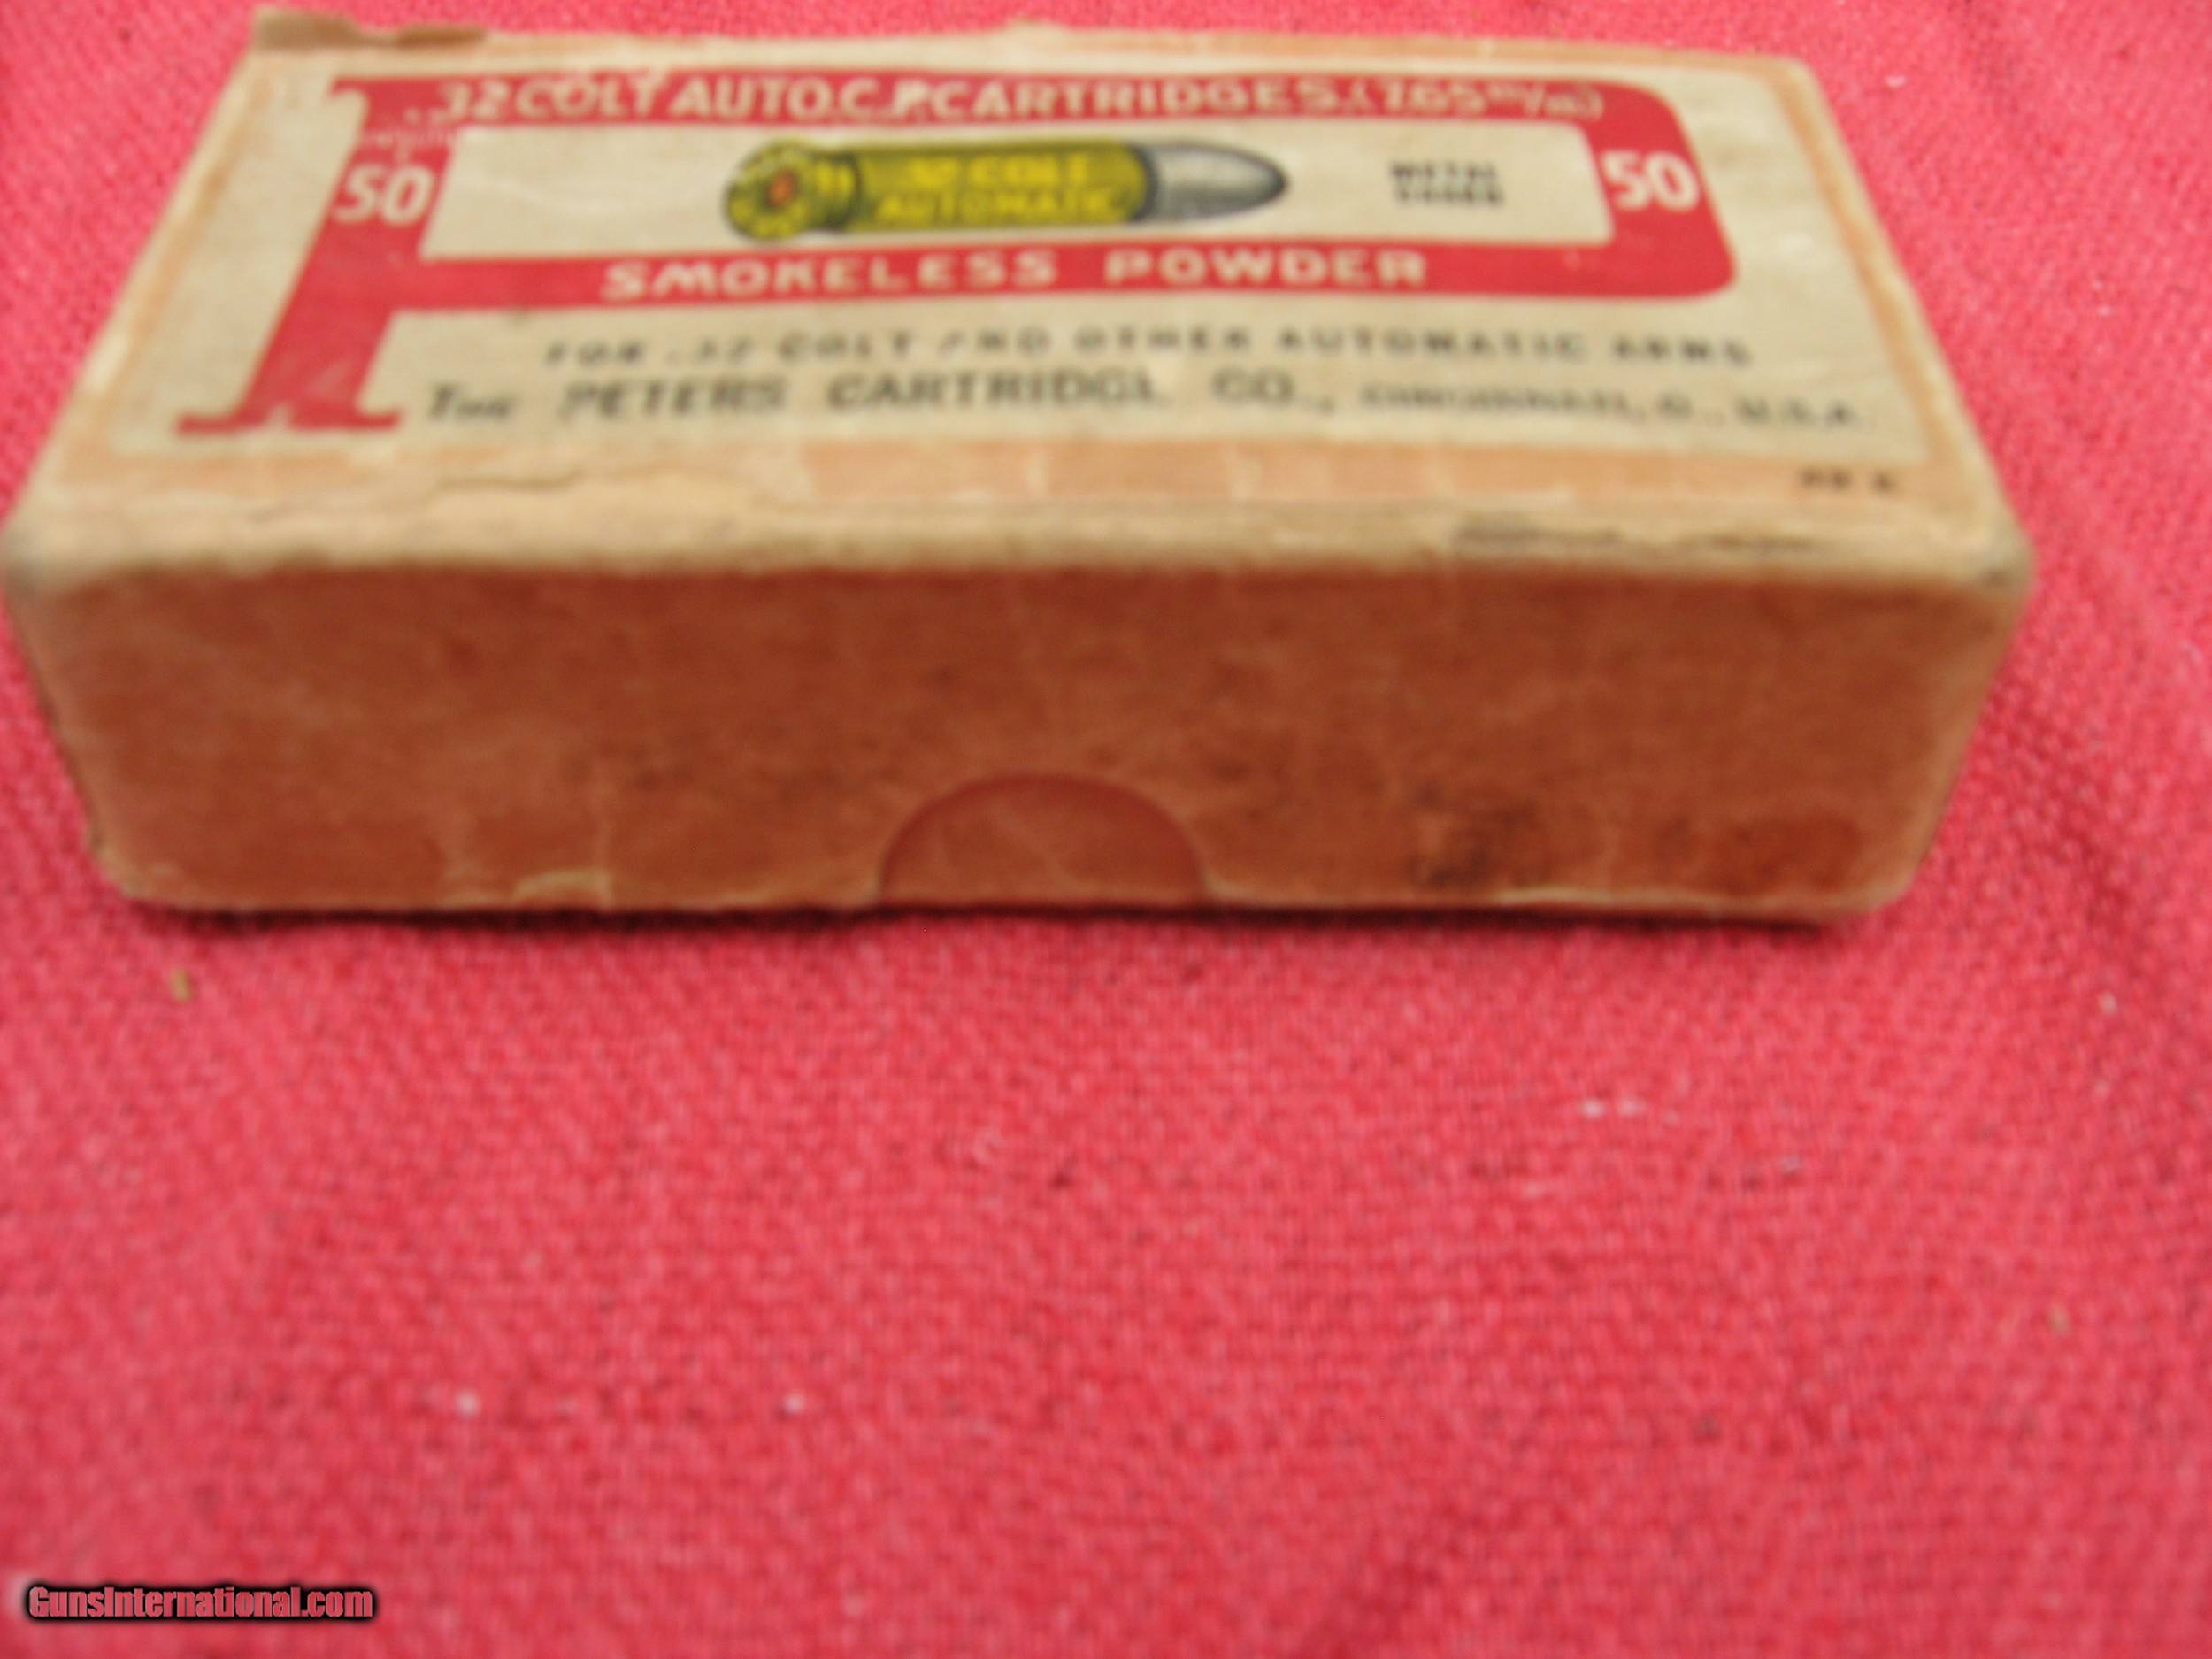 PETERS EARLY (LARGE P) 32 COLT AUTO CALIBER BOX